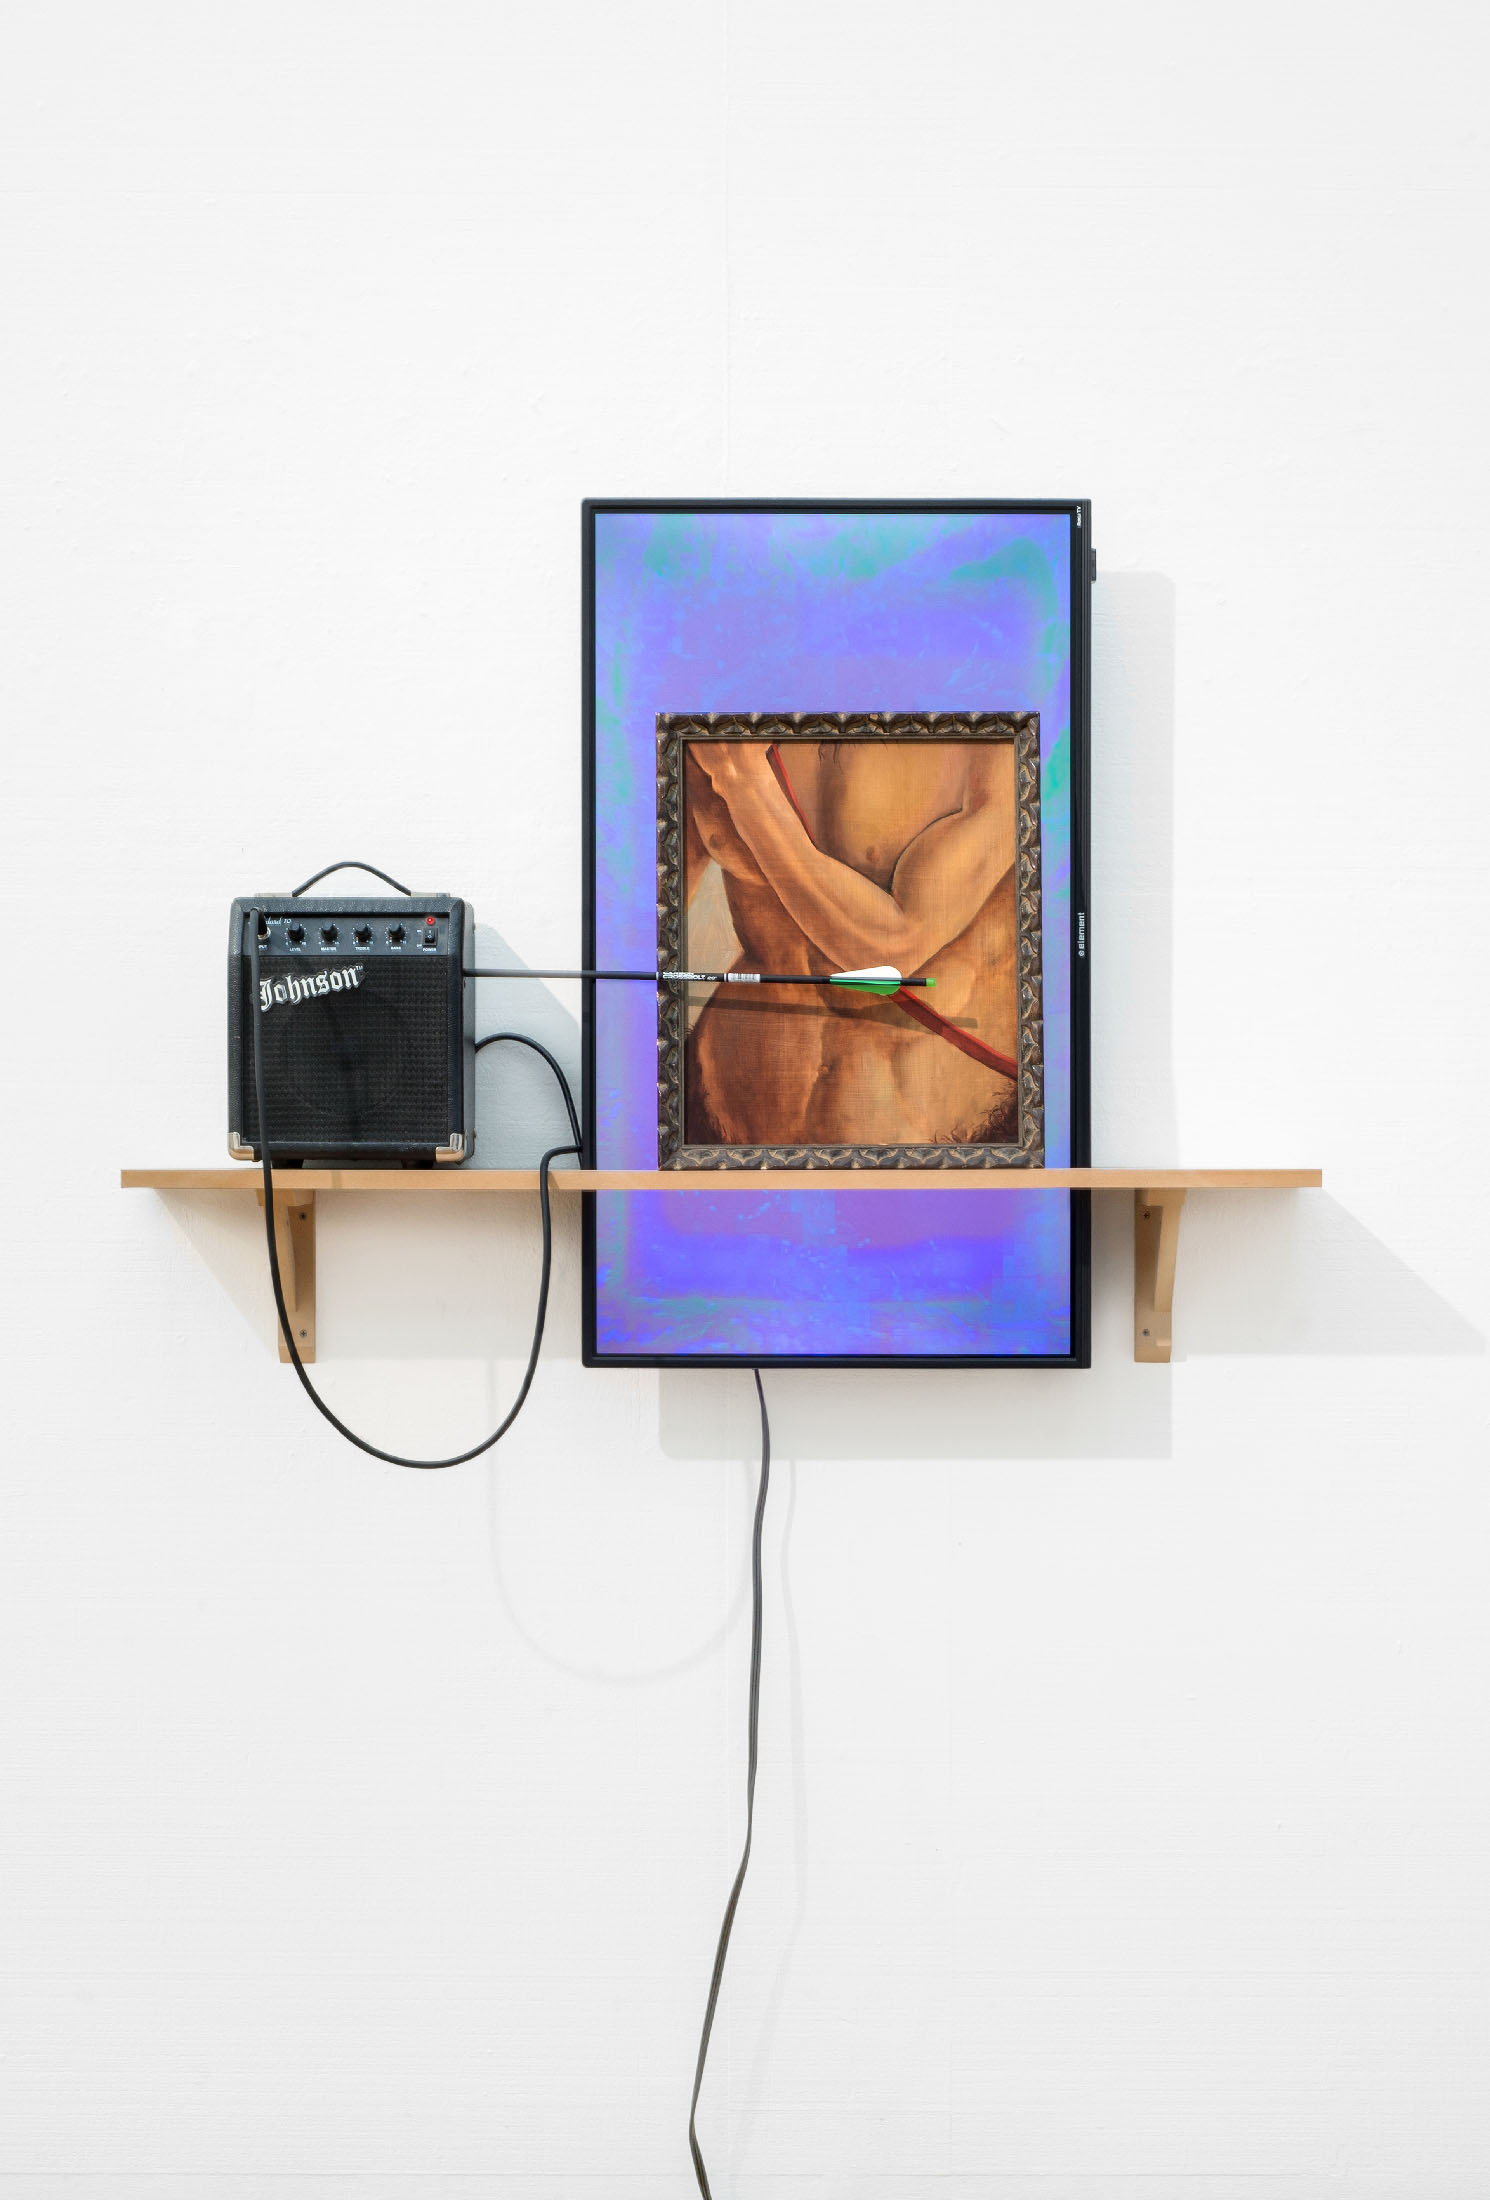 a guitar amplifier, flatscreen television mounted in portrait mode, and a painting of a detail of a centaur